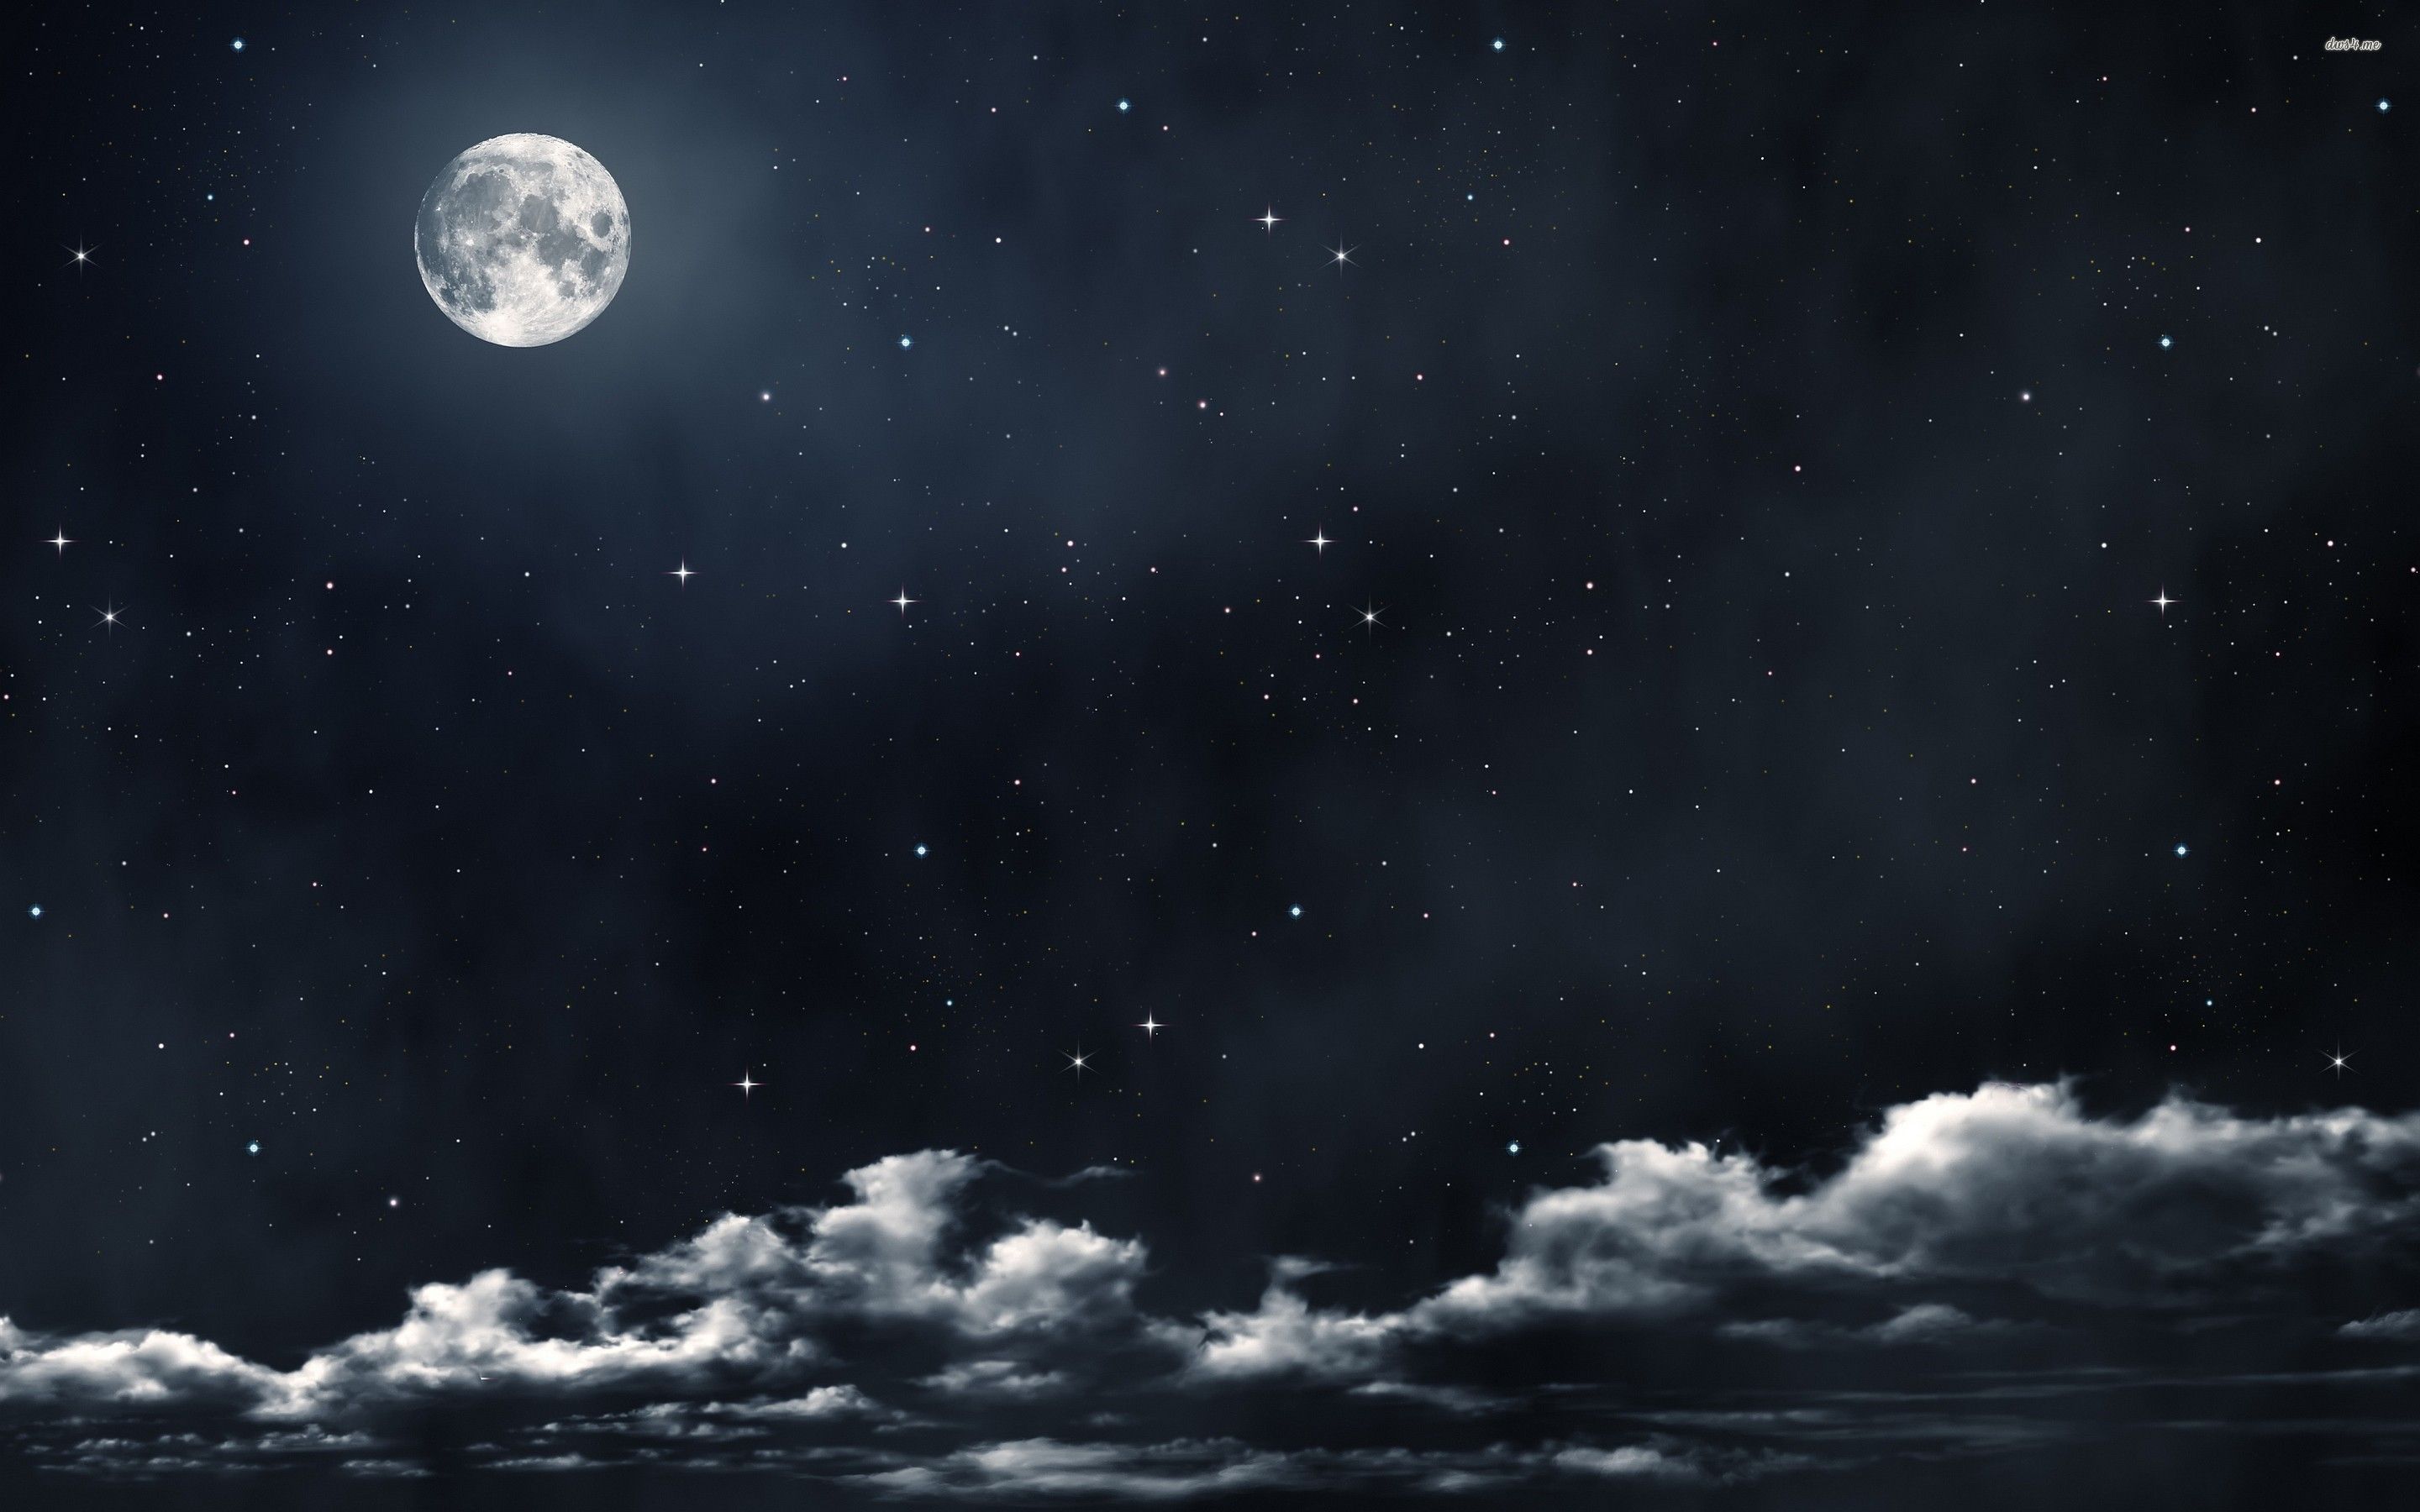 Pics of full moon and stars dowload Download 3D HD colour design. Moon and stars wallpaper, Night sky moon, Sky moon